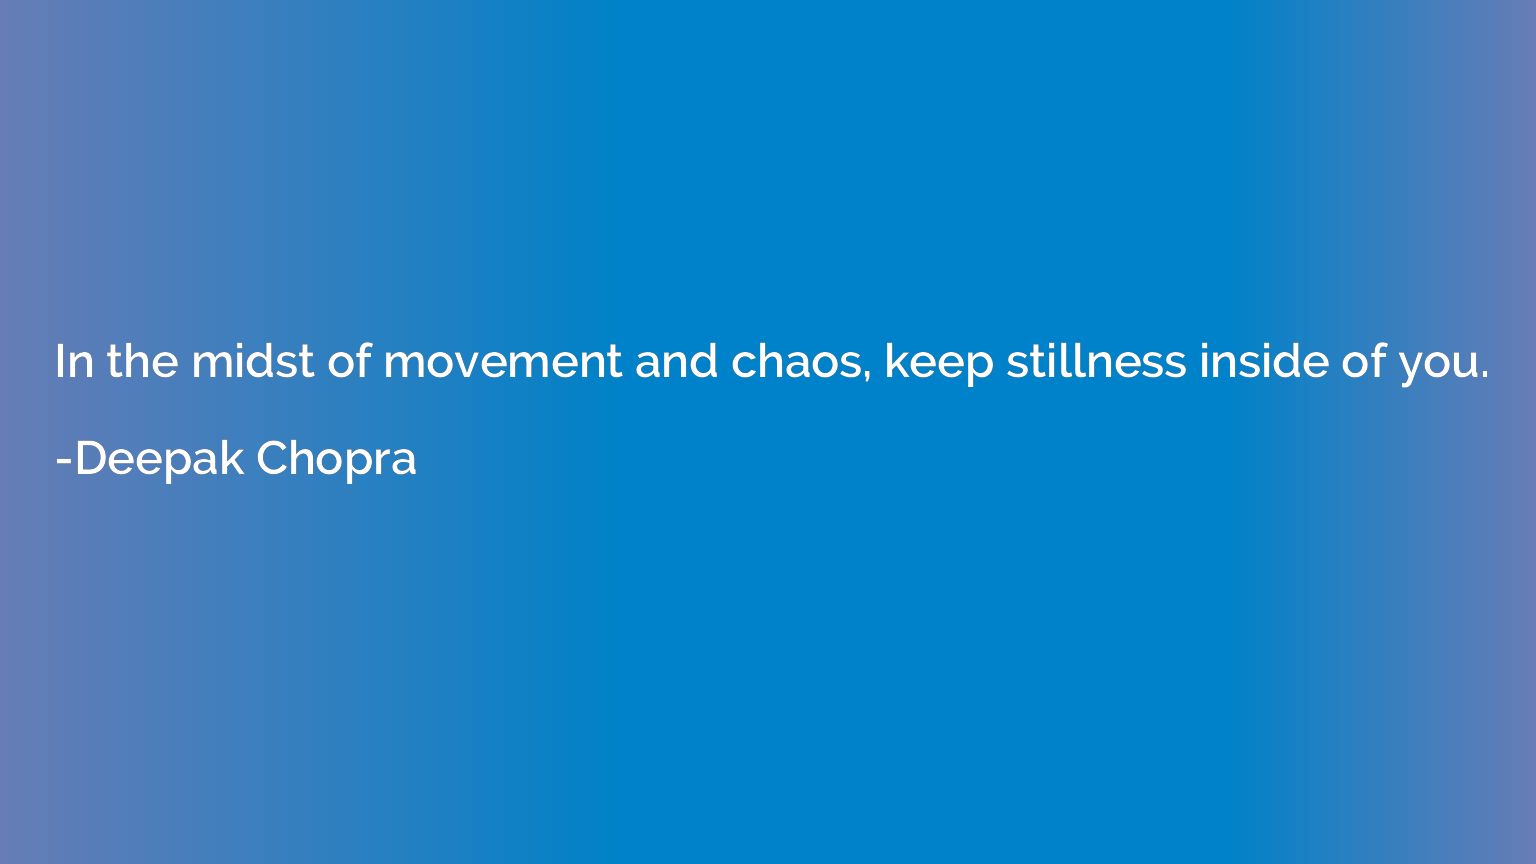 In the midst of movement and chaos, keep stillness inside of